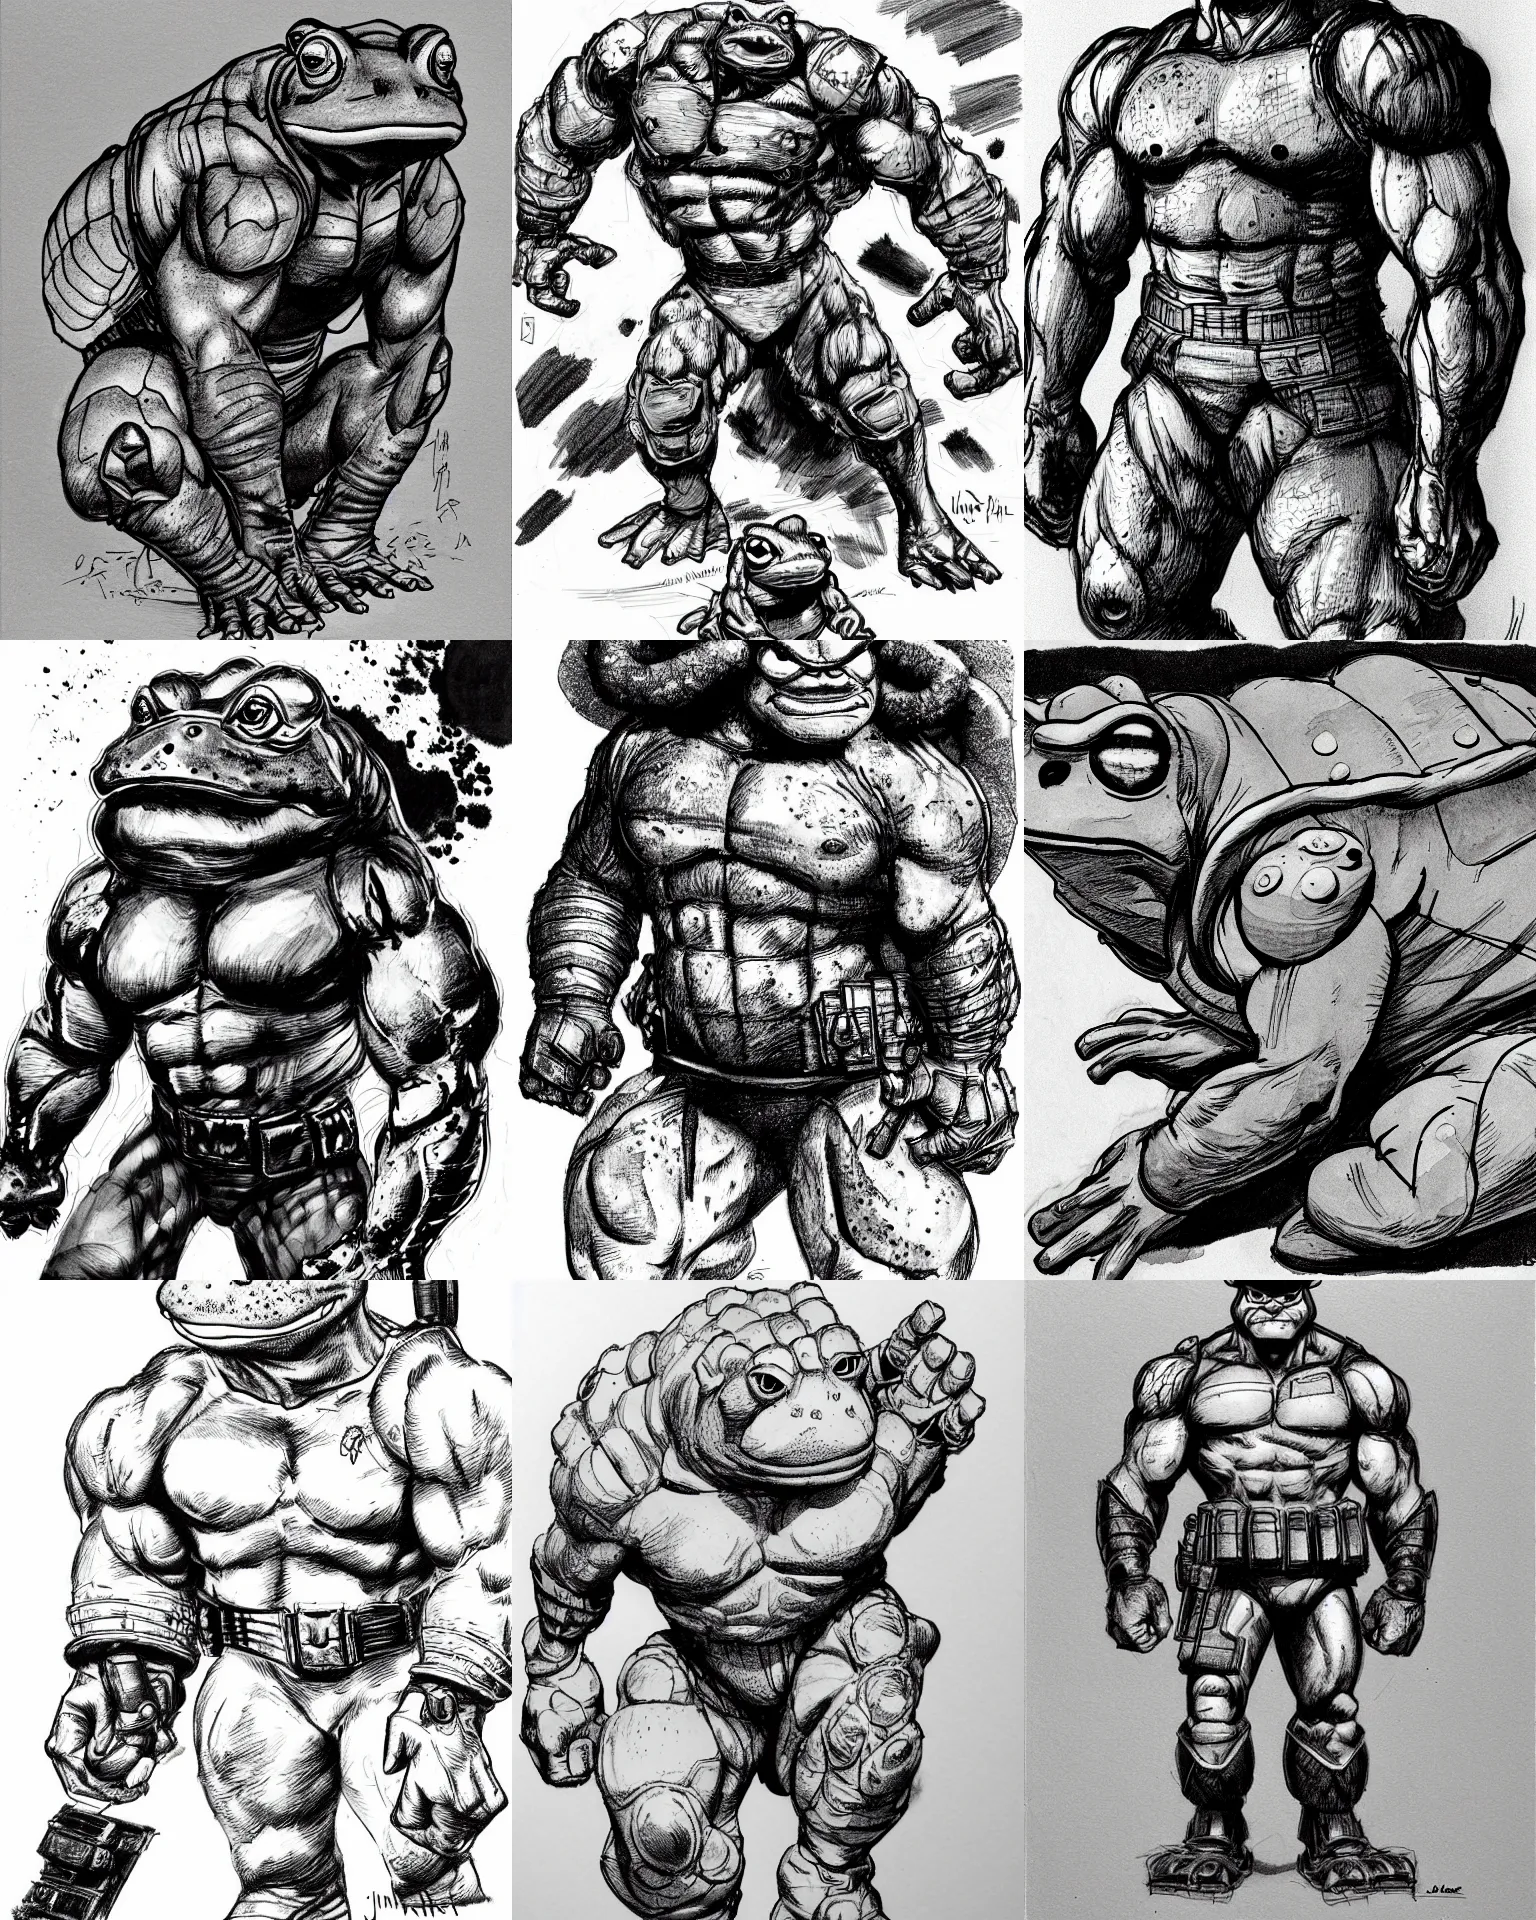 Prompt: toad animal!!! jim lee!!! medium shot!! flat grayscale ink sketch by jim lee close up in the style of jim lee, depressed dramatic bicep pose, swat soldier armor terminator hulk toad animal looks at the camera by jim lee